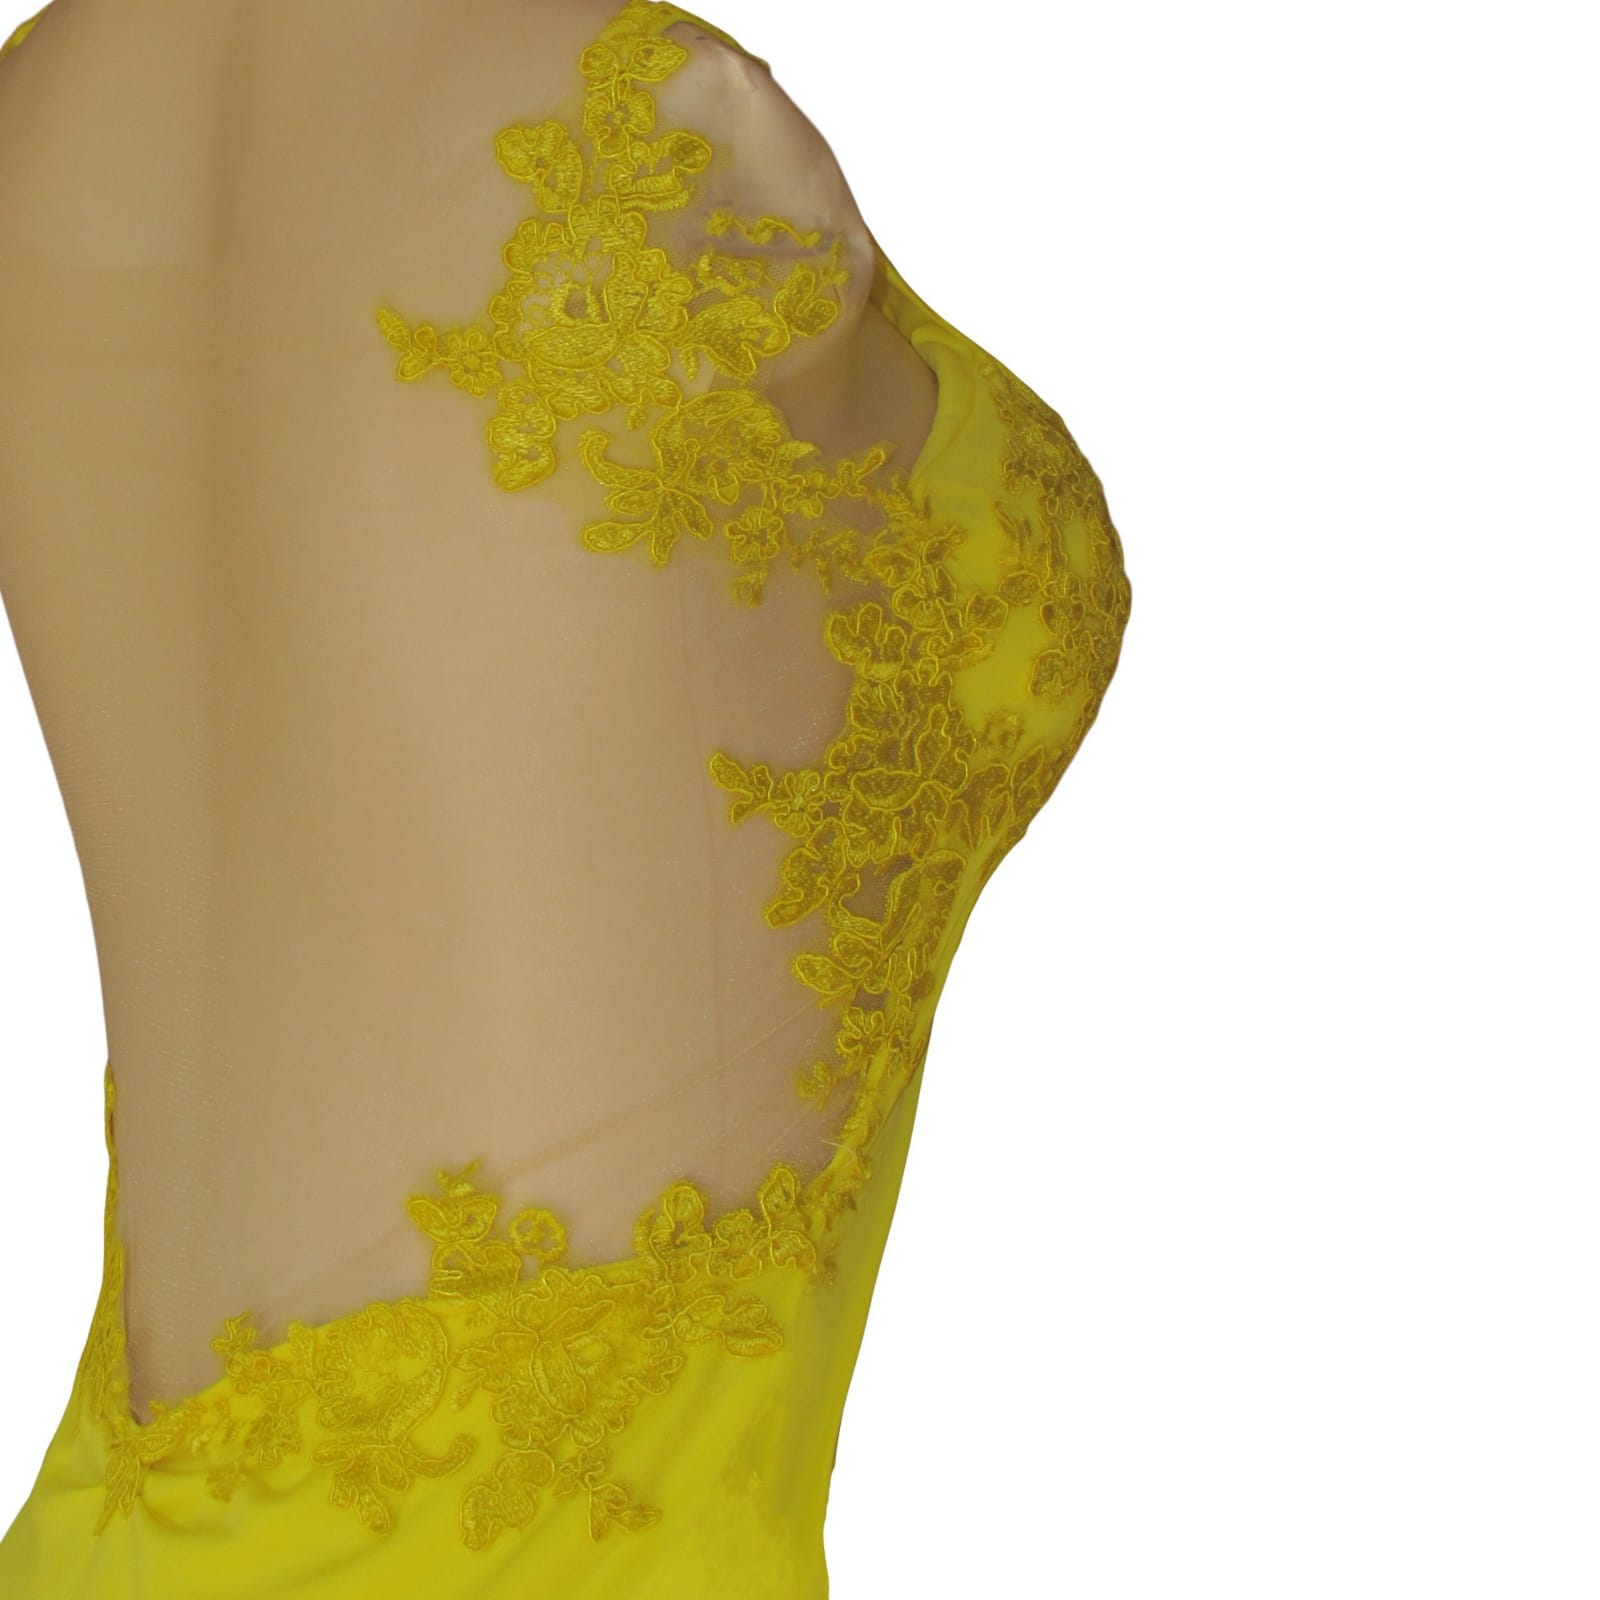 Canary yellow lace soft mermaid prom dress 2 canary yellow, lace, soft mermaid prom dance dress with sheer legs, detailed with lace. With an illusion open back.